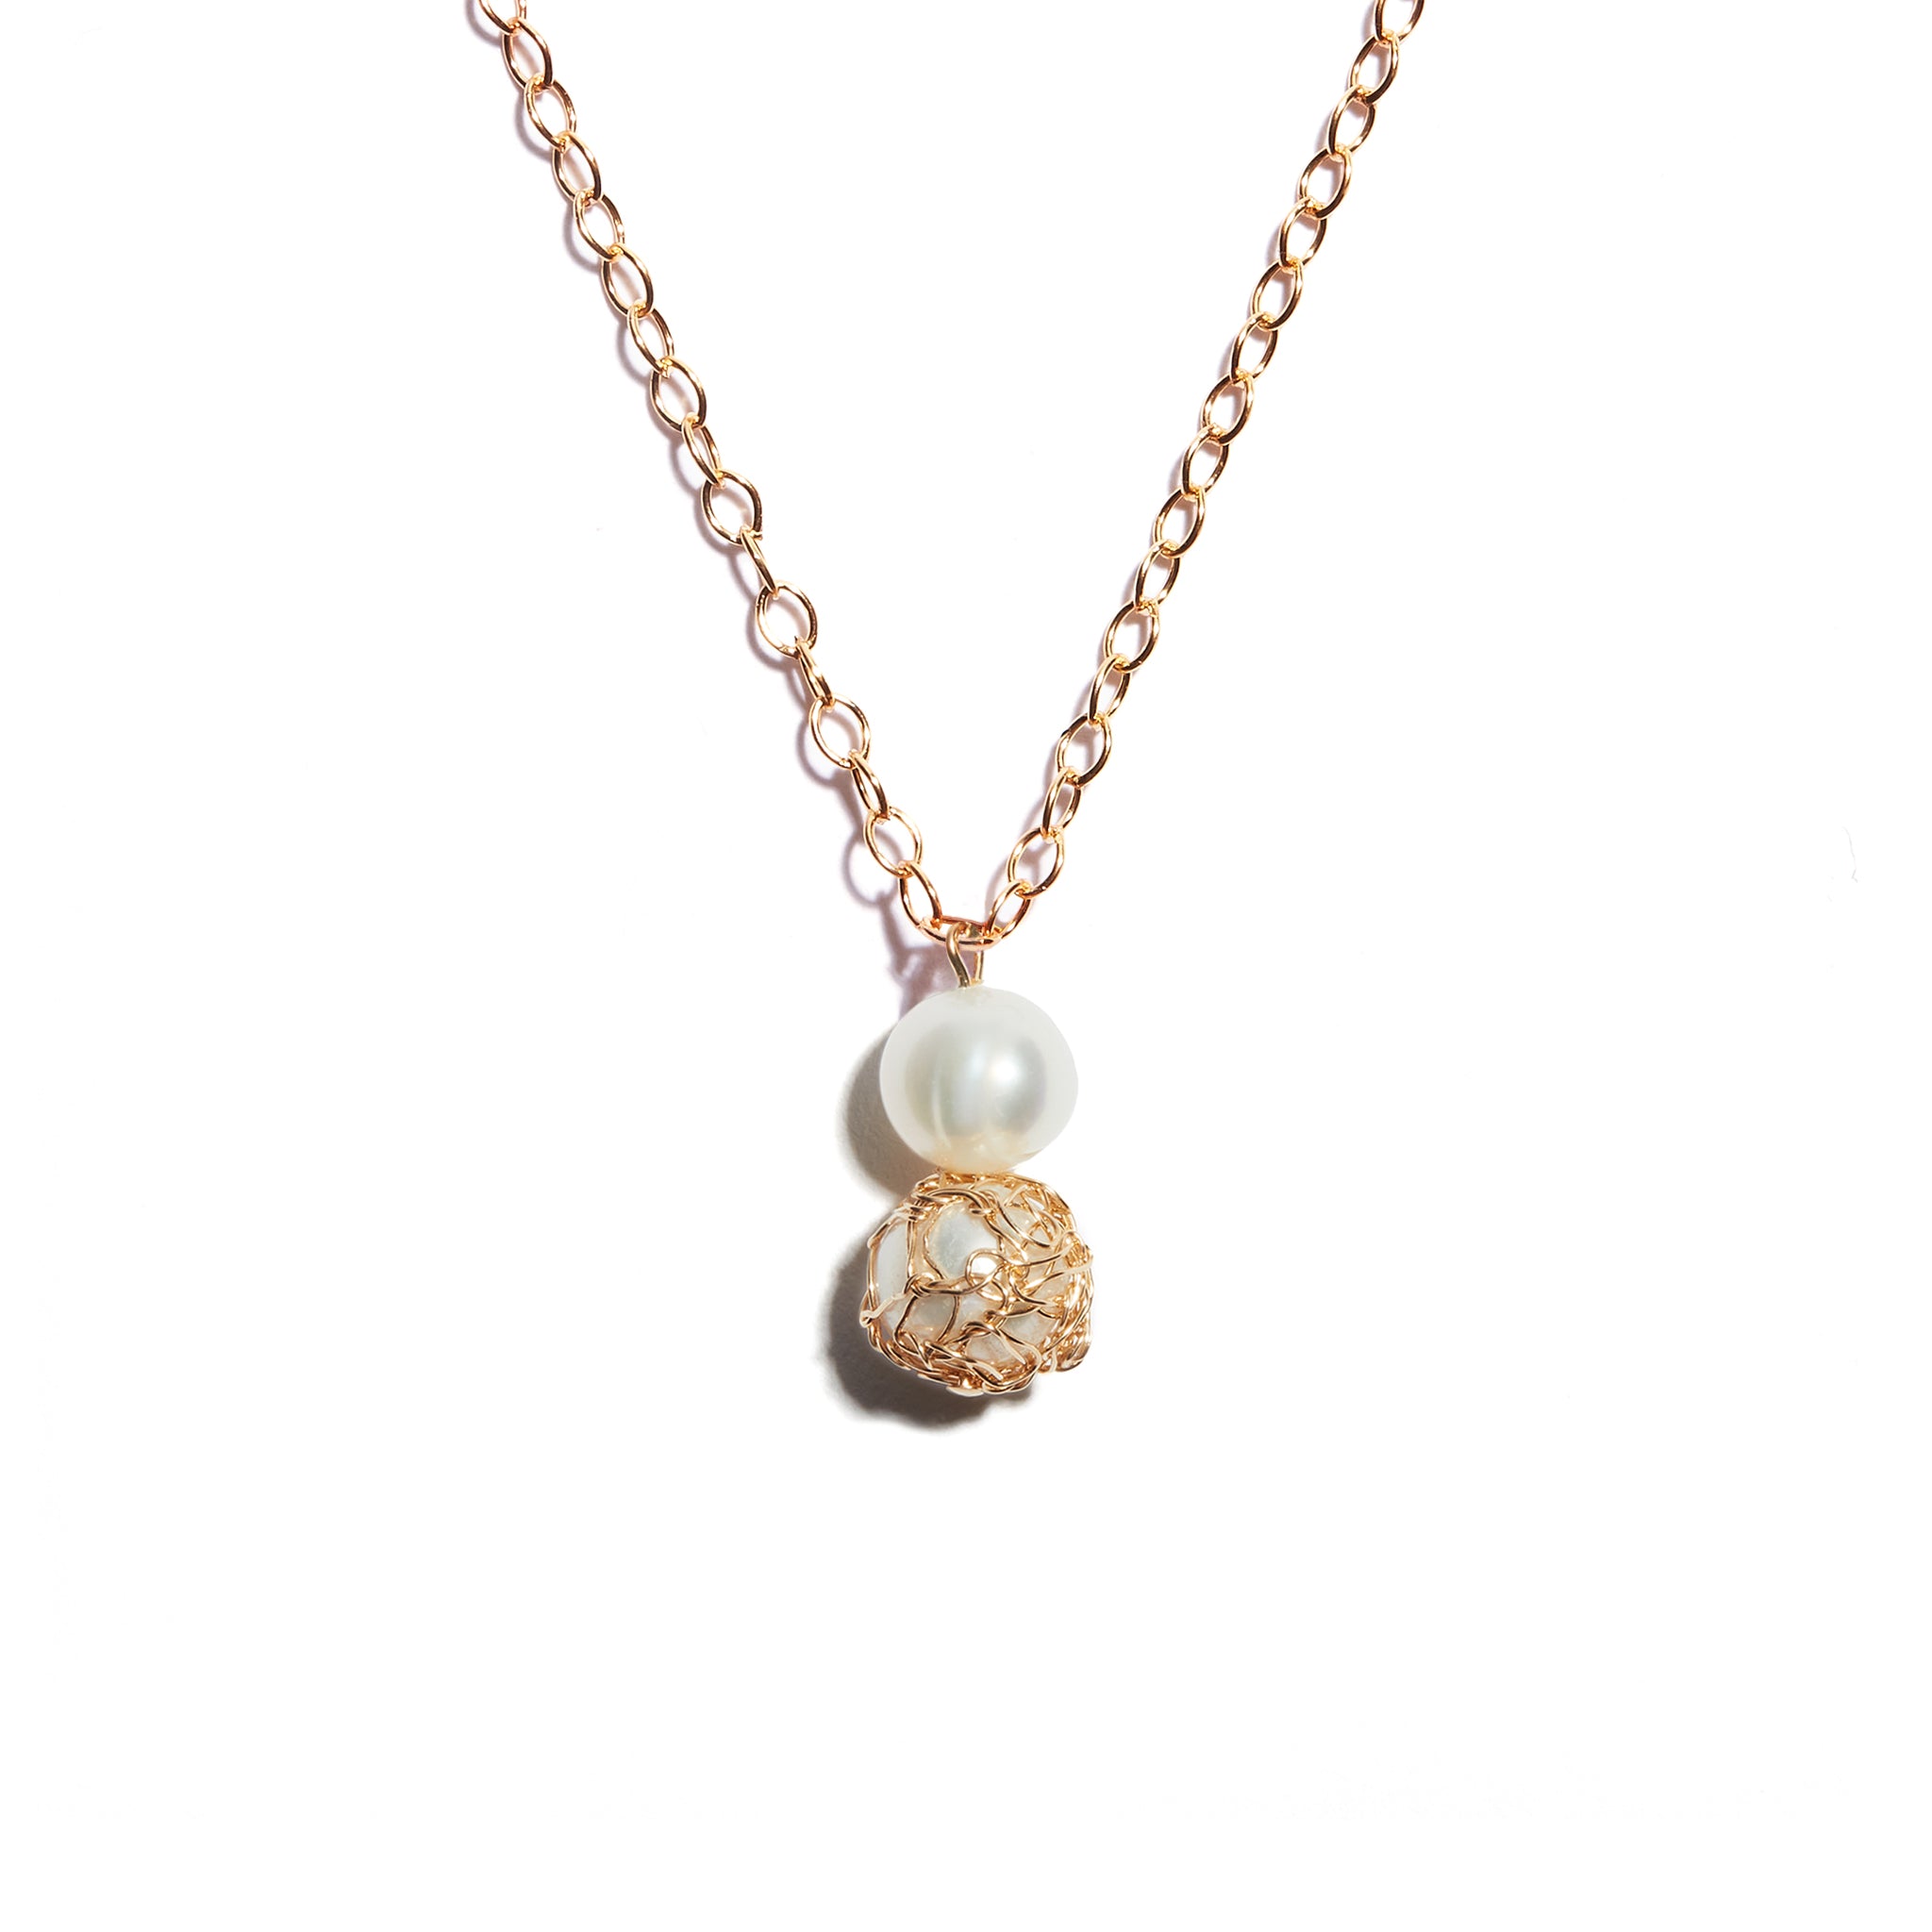 Exquisite double pearl pendant featuring crochet detailing on one pearl, crafted from high-quality 14 carat gold-fill, adding sophistication and uniqueness to your ensemble.